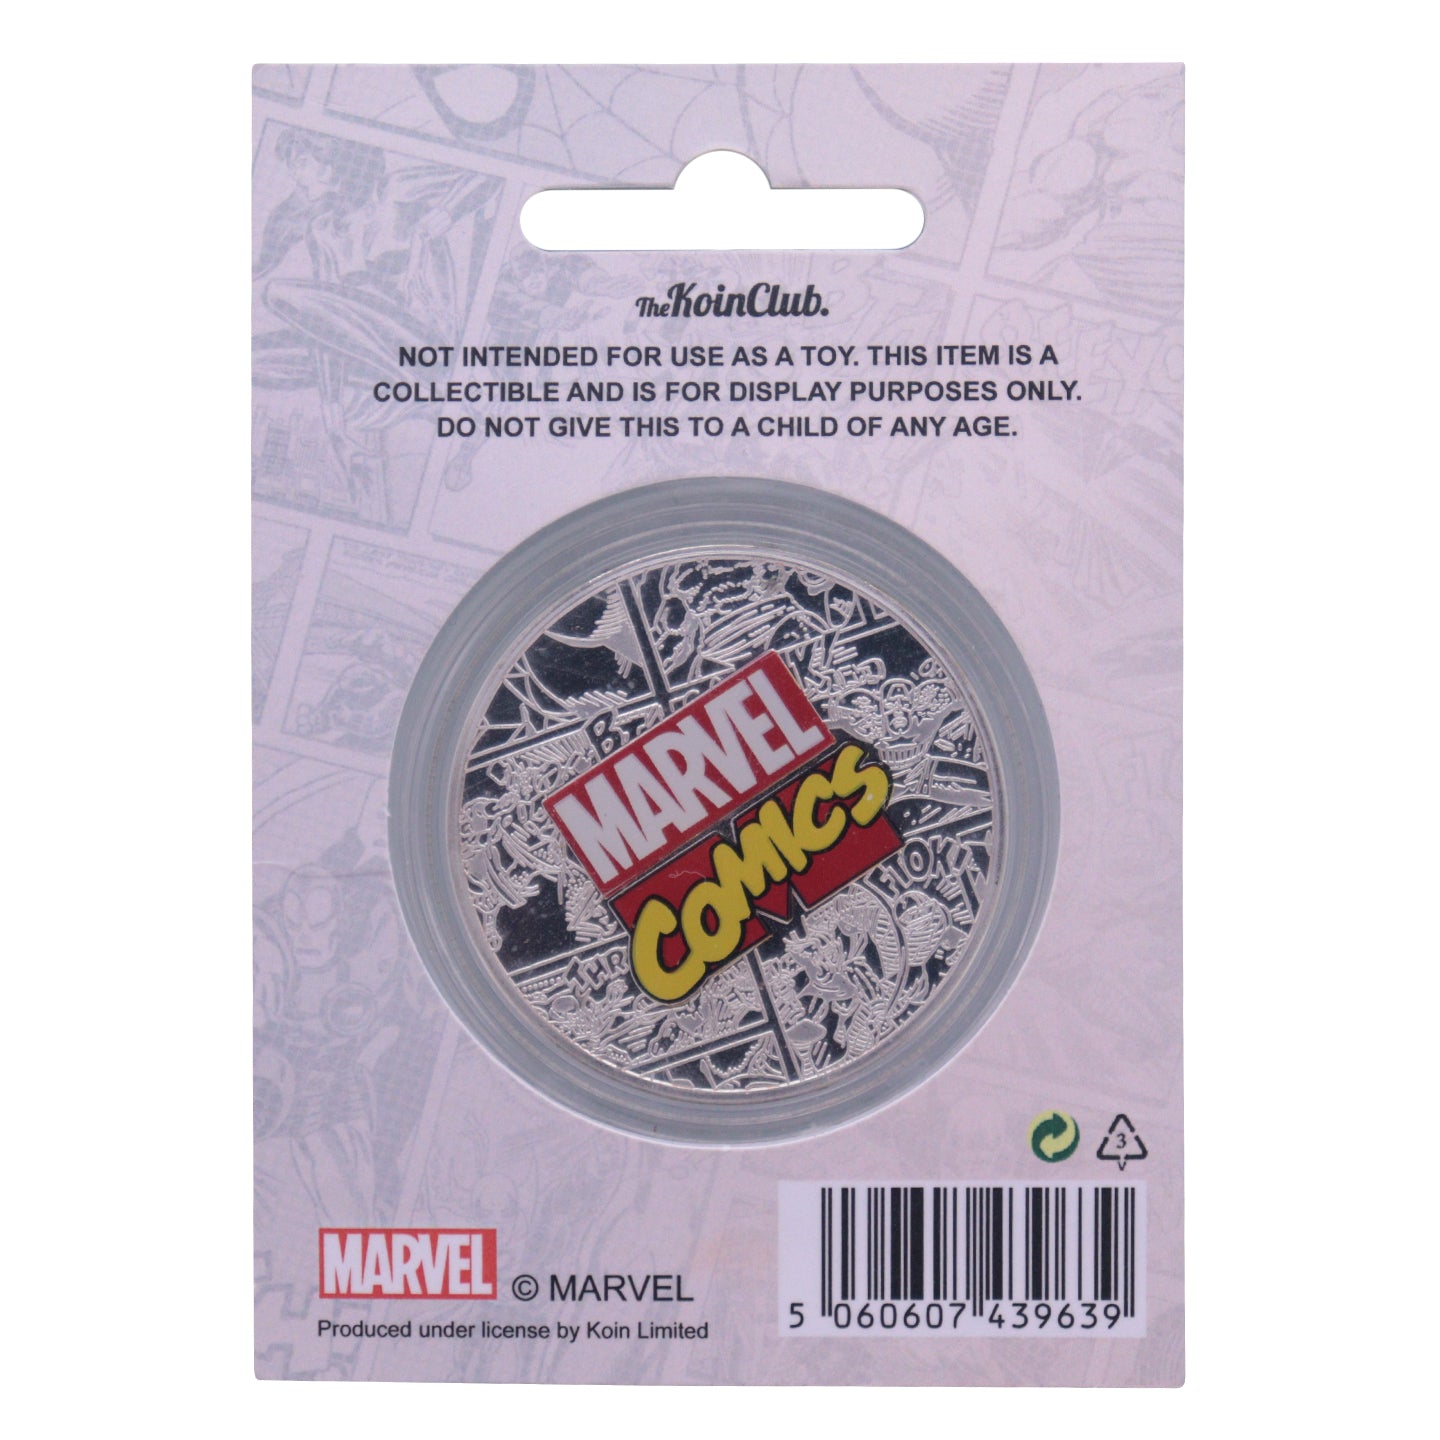 Marvel Limited Edition .999 Silver Plated Hulk Collectible Coin